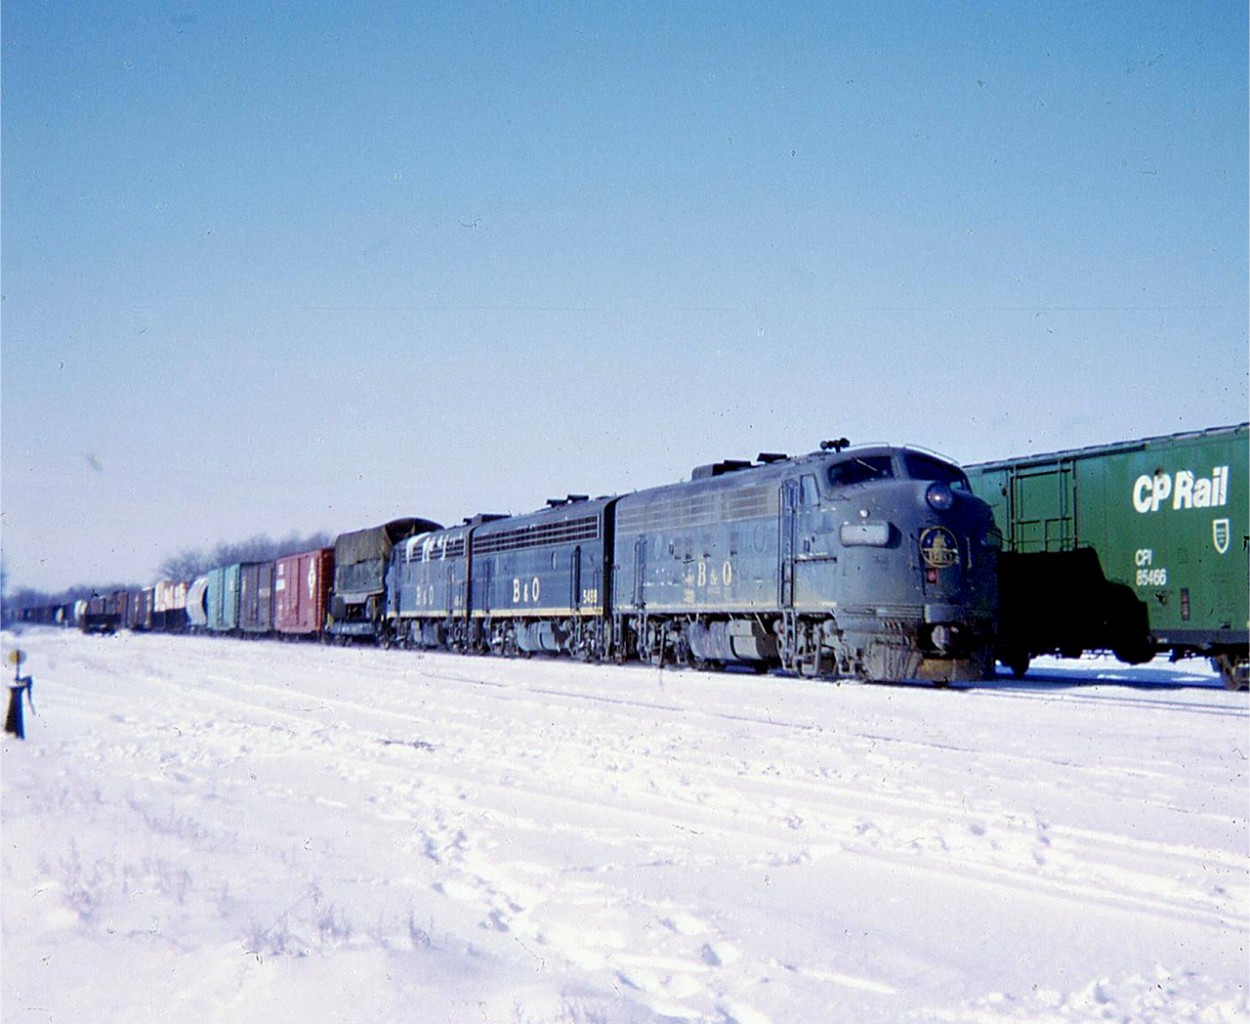 In the winter of 1971/72 CP had leased a lot of engines from other railroads. By February the crunch had really hit and CP went to the B&O for help. I had received a phone call from Bruce Chapman in Ottawa that these 3 engines were in Windsor. The next morning train 74 with the very first use of the leased F7’s is drifting down the grade at Guelph Jct hauling 97 cars for Toronto etc.  No sooner had this trio arrived Agincourt they were quickly needed for train 955 on the Mactier Sub and the following morning were in Chapleau. CP would lease a total of 28 F7A & B units from B&O, 1 or 2 of which were in C&O paint but relettered.